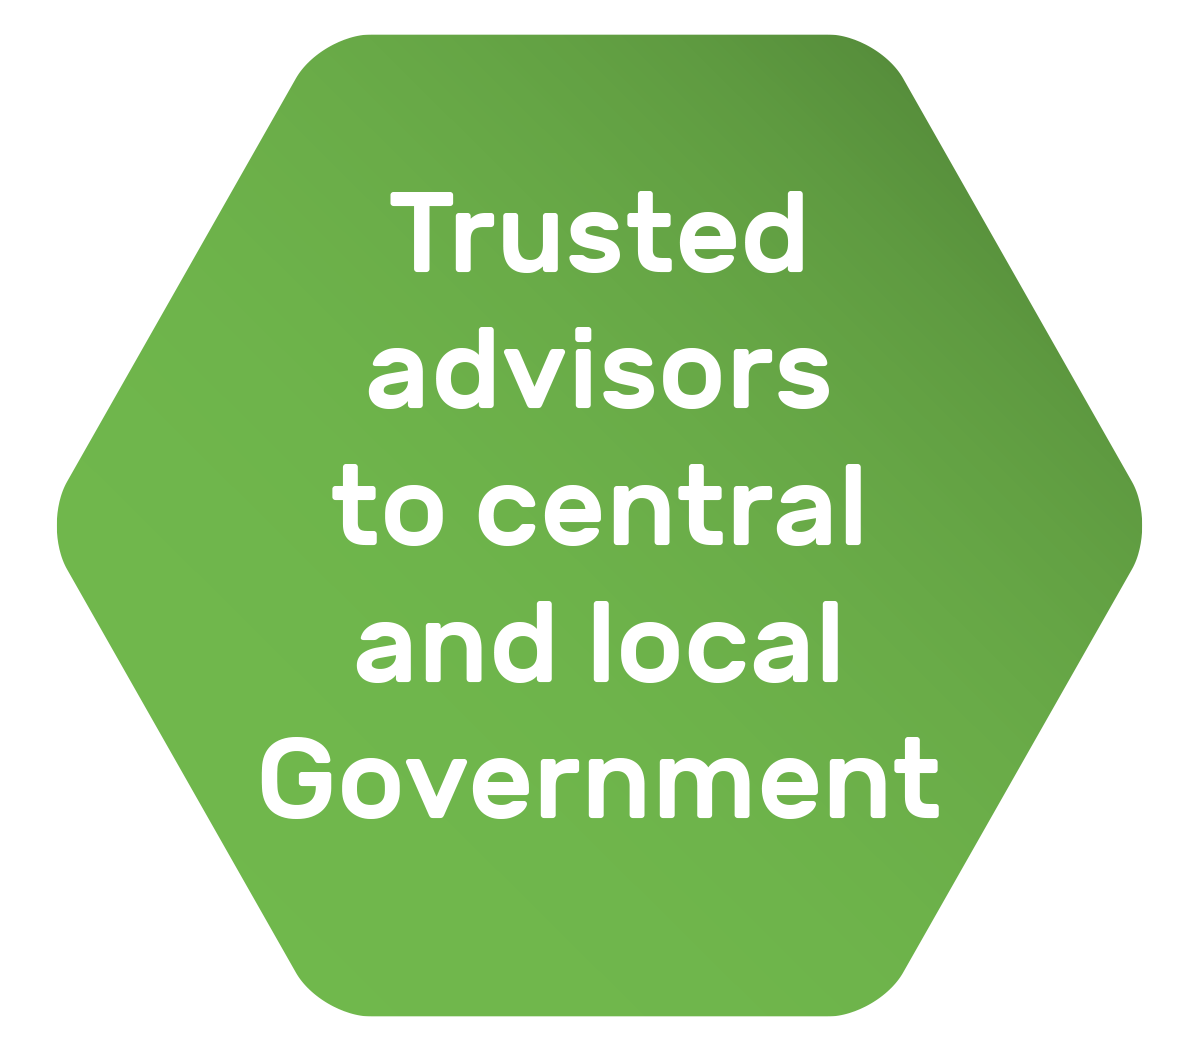 Trusted advisors to central and local Government